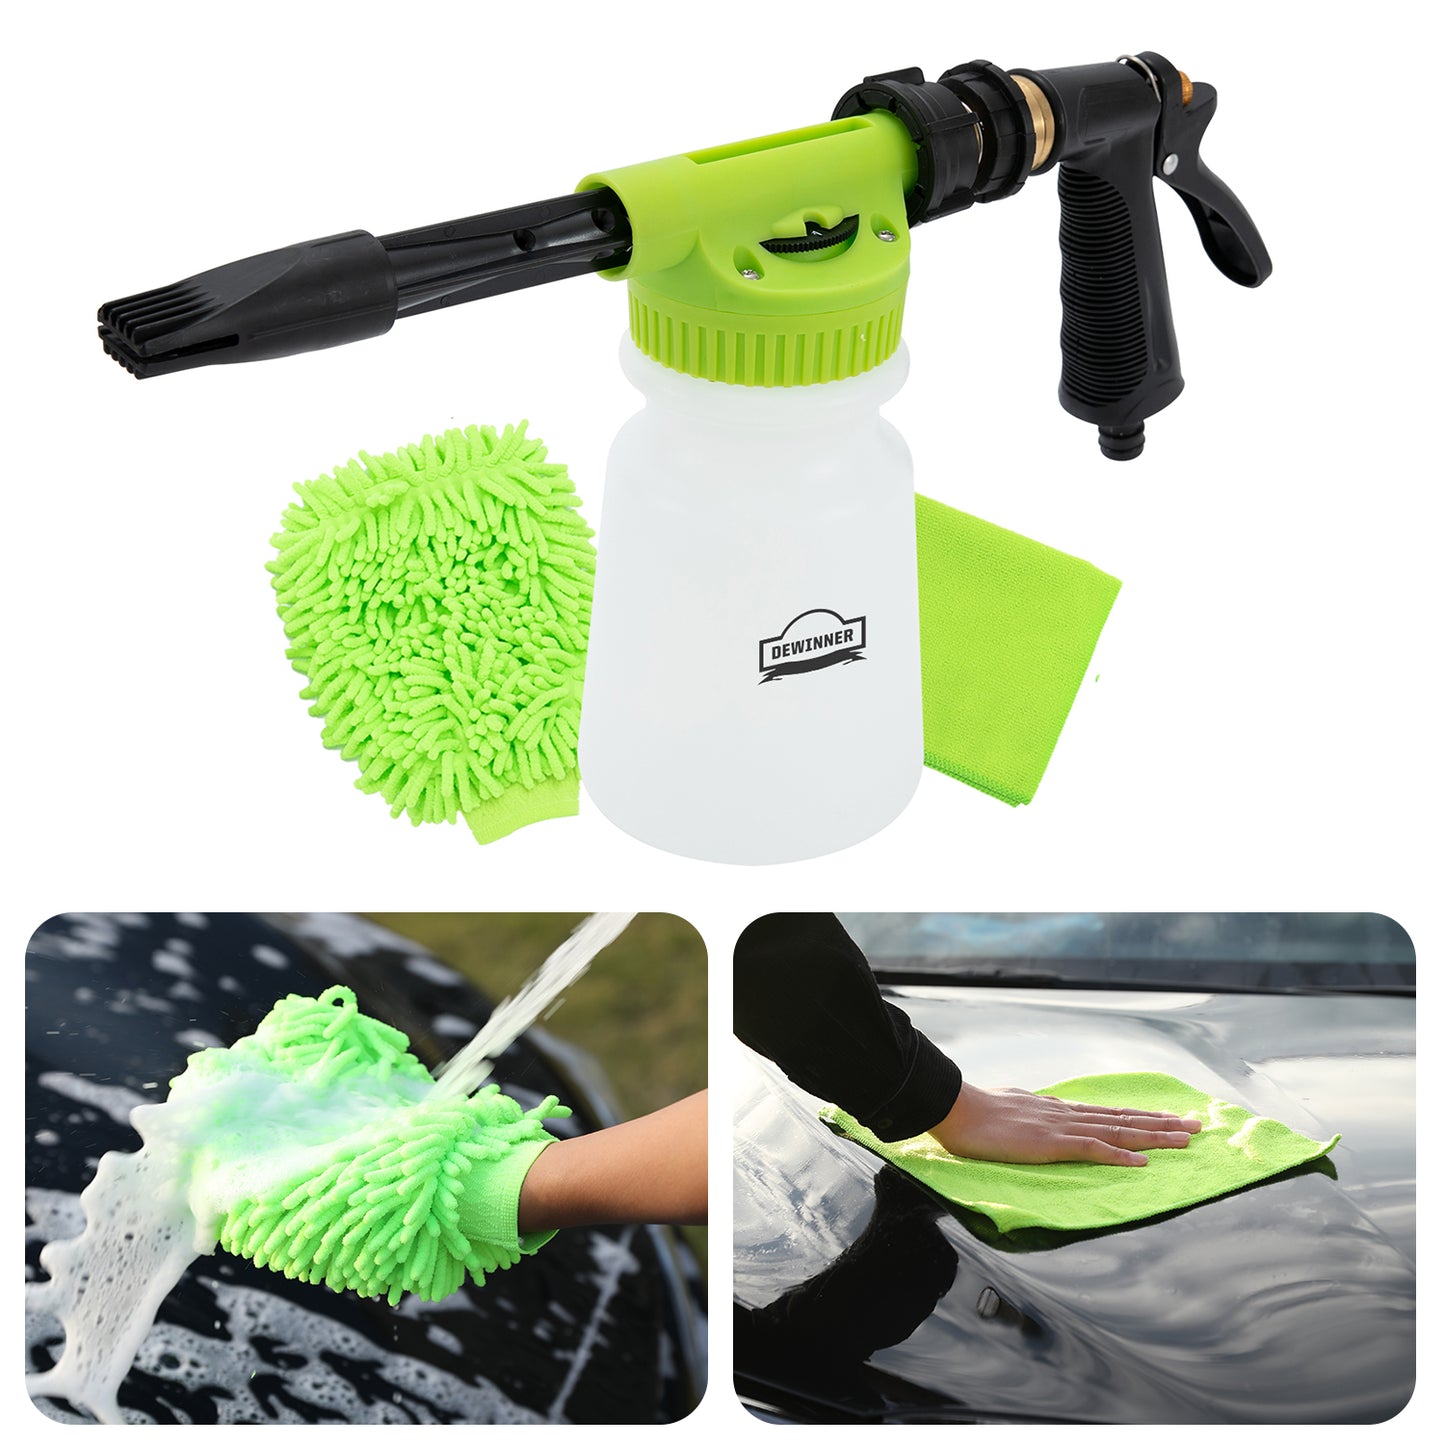 DEWINNER Foam Gun Sprayer with Thick Suds Ultimate Car Wash Foamer, Connects to Any Garden Hose